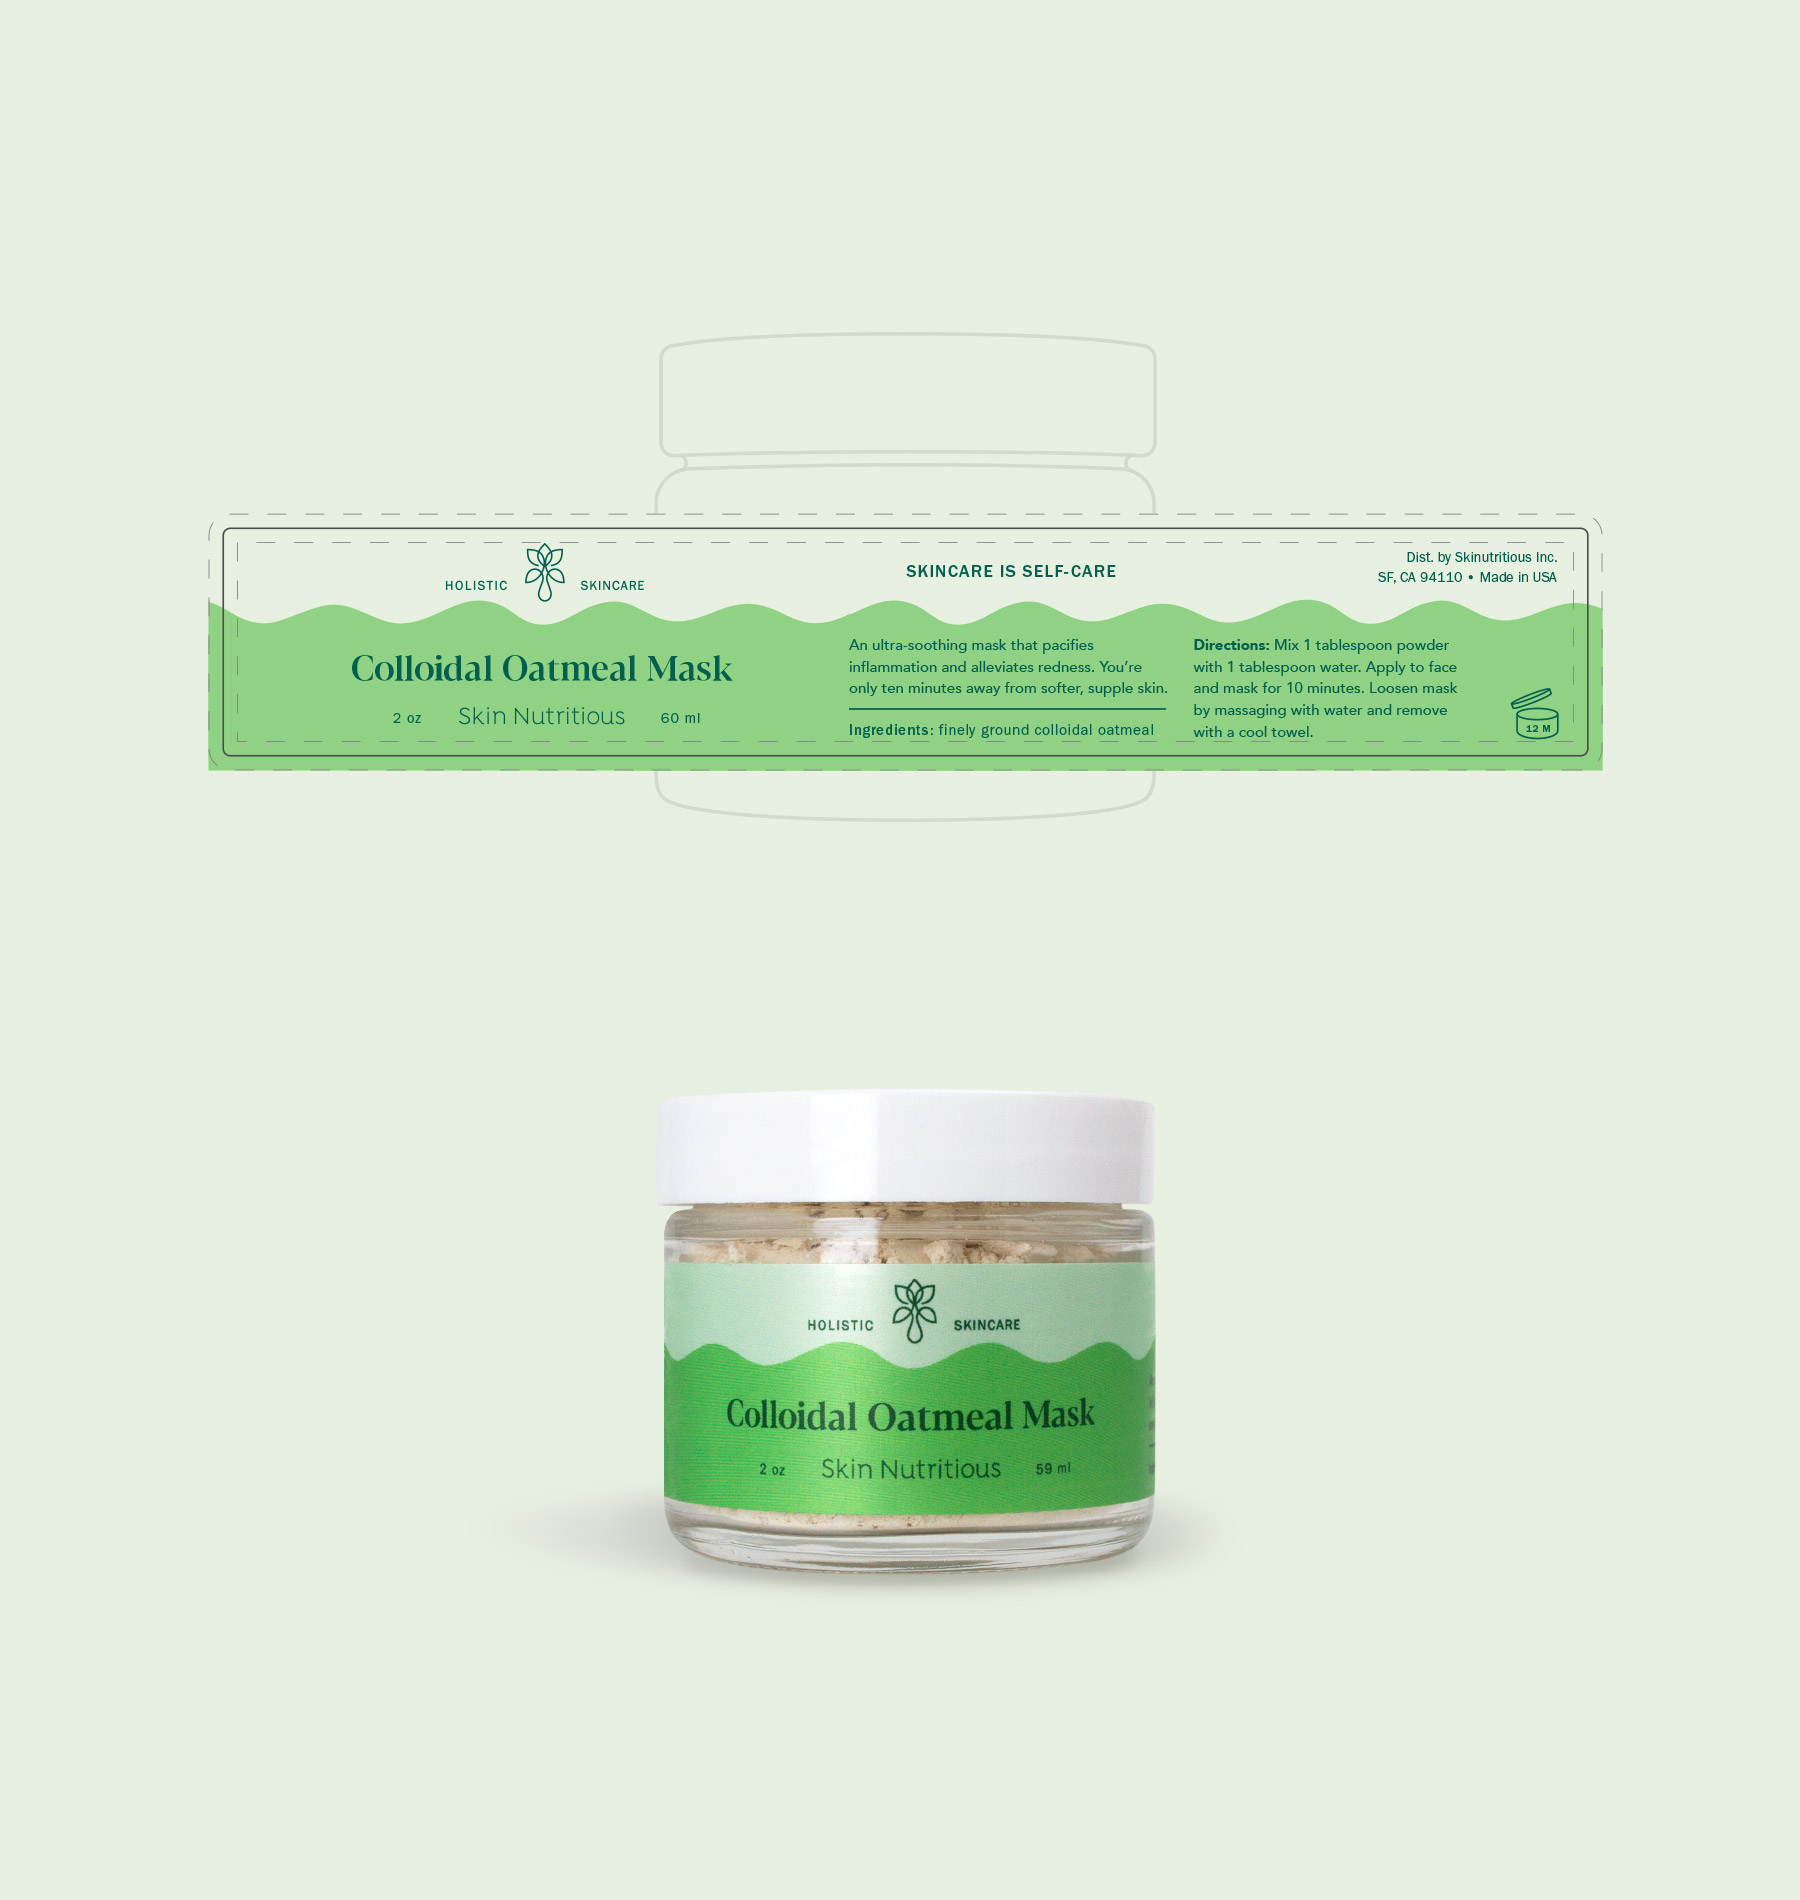 Colloidal Oatmeal Mask die-line packaging design